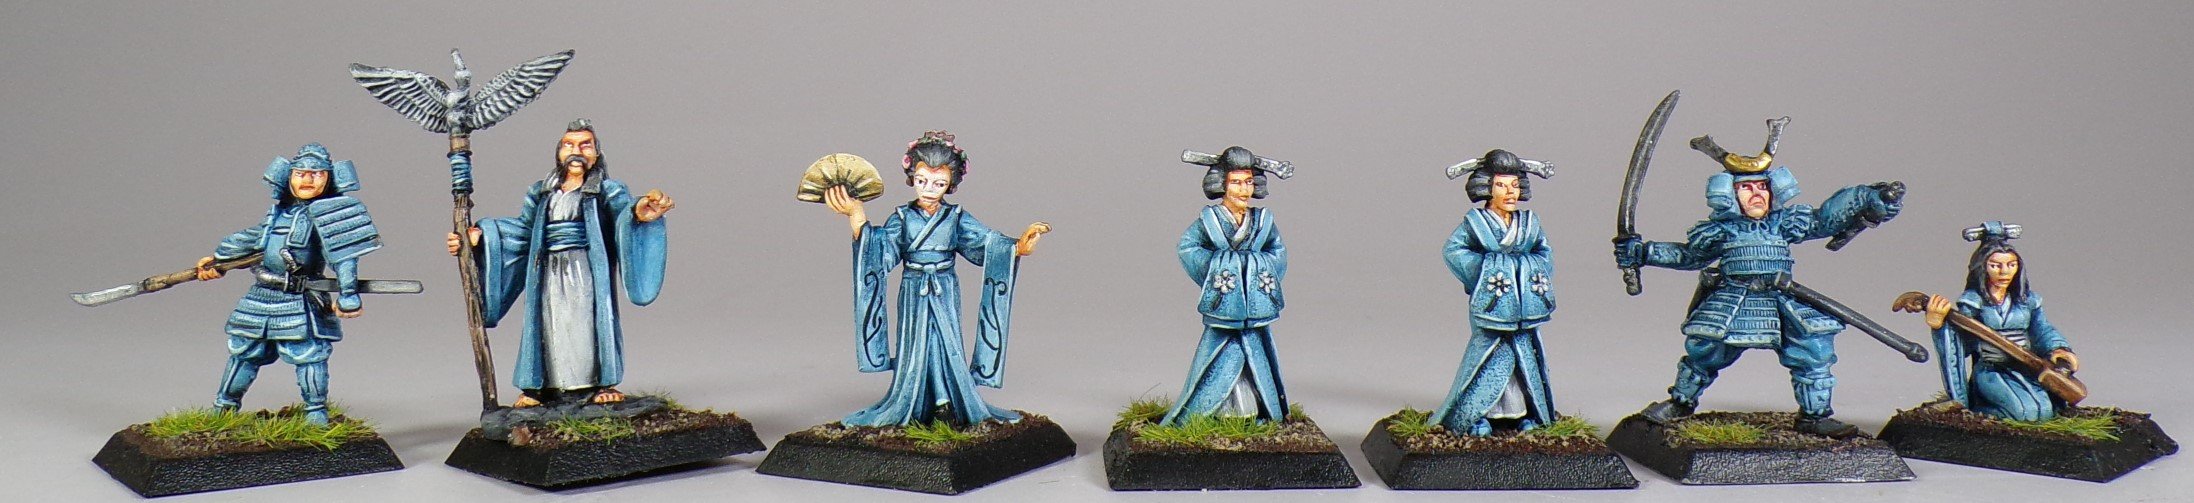 L5R Legend of the Five Rings Miniature Painting Service Paintedfigs (9).jpg